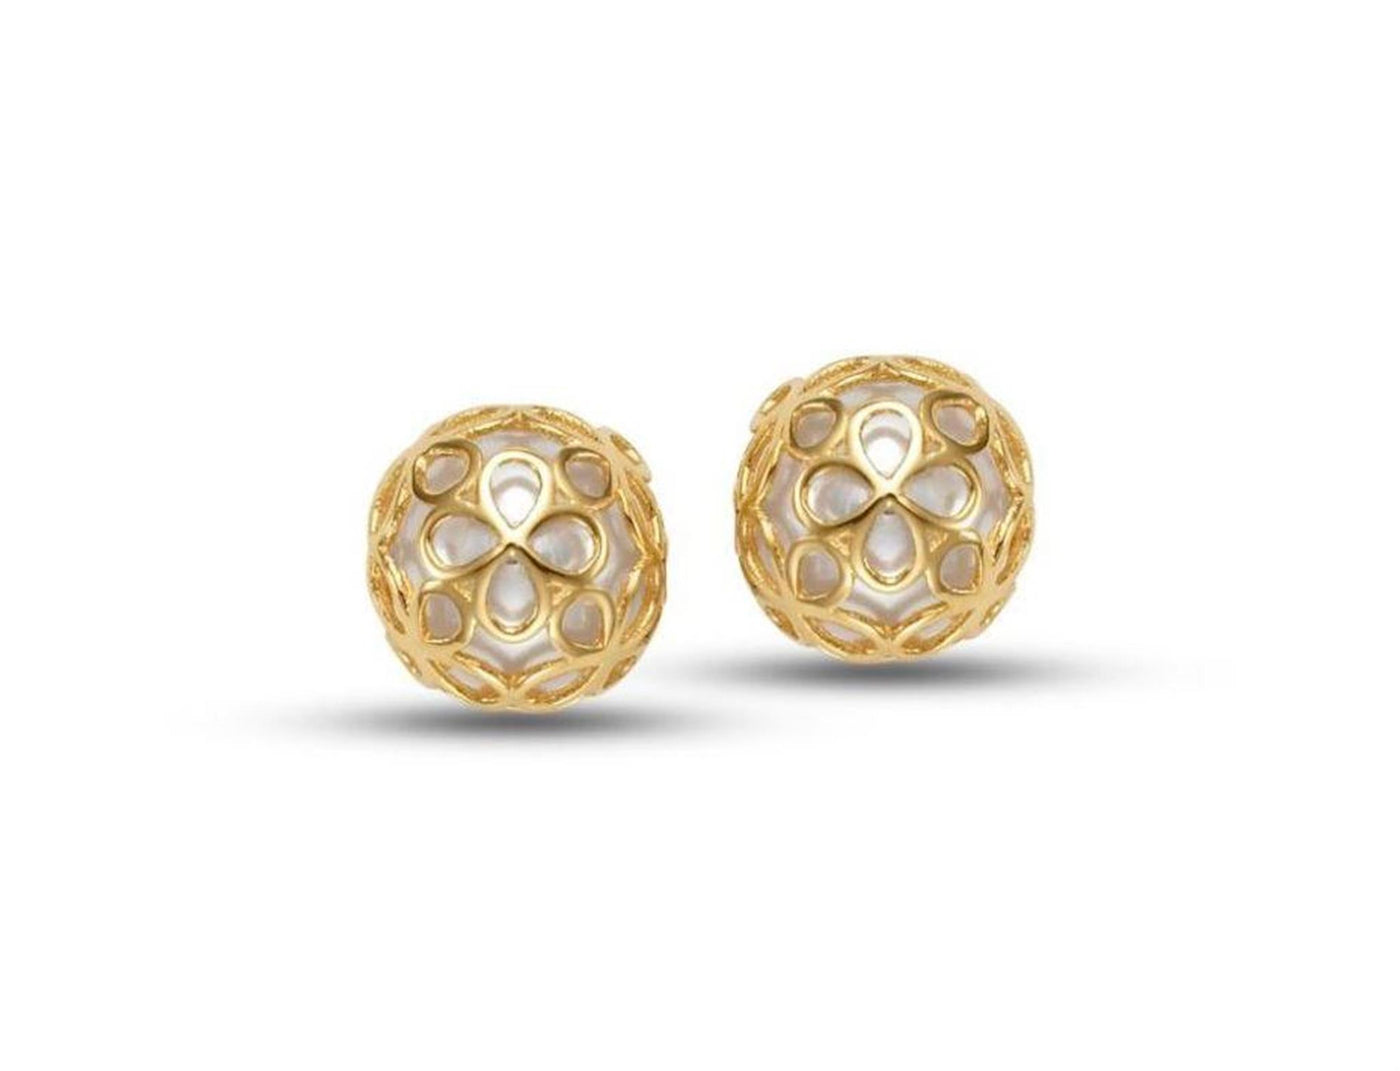 14K Yellow Gold Stud Style Earrings Featuring Freshwater Pearls